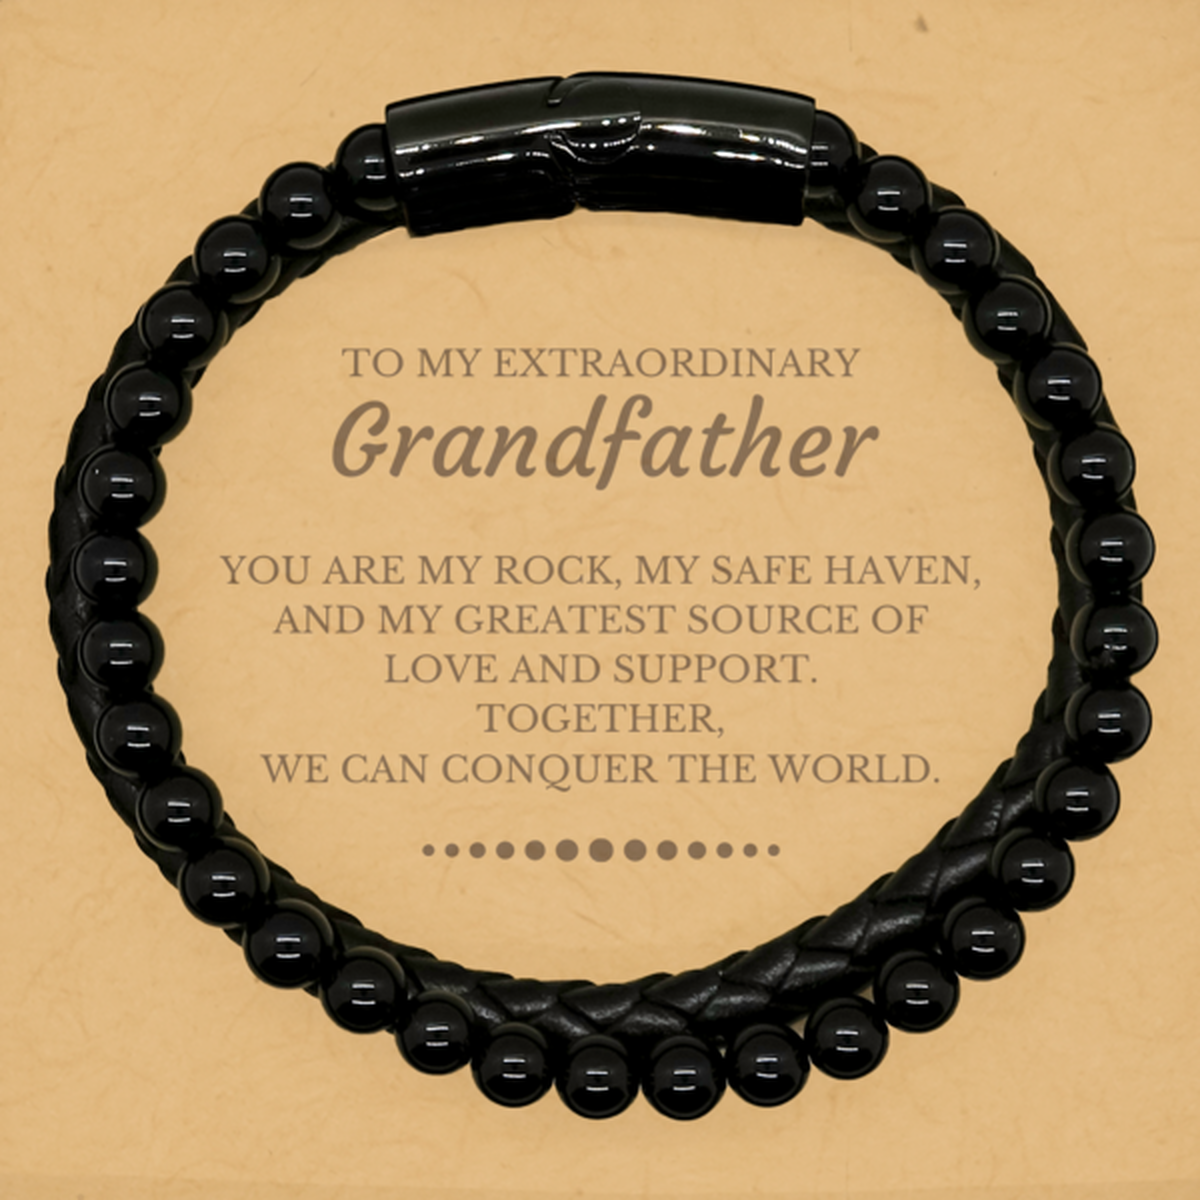 To My Extraordinary Grandfather Gifts, Together, we can conquer the world, Birthday Stone Leather Bracelets For Grandfather, Christmas Gifts For Grandfather